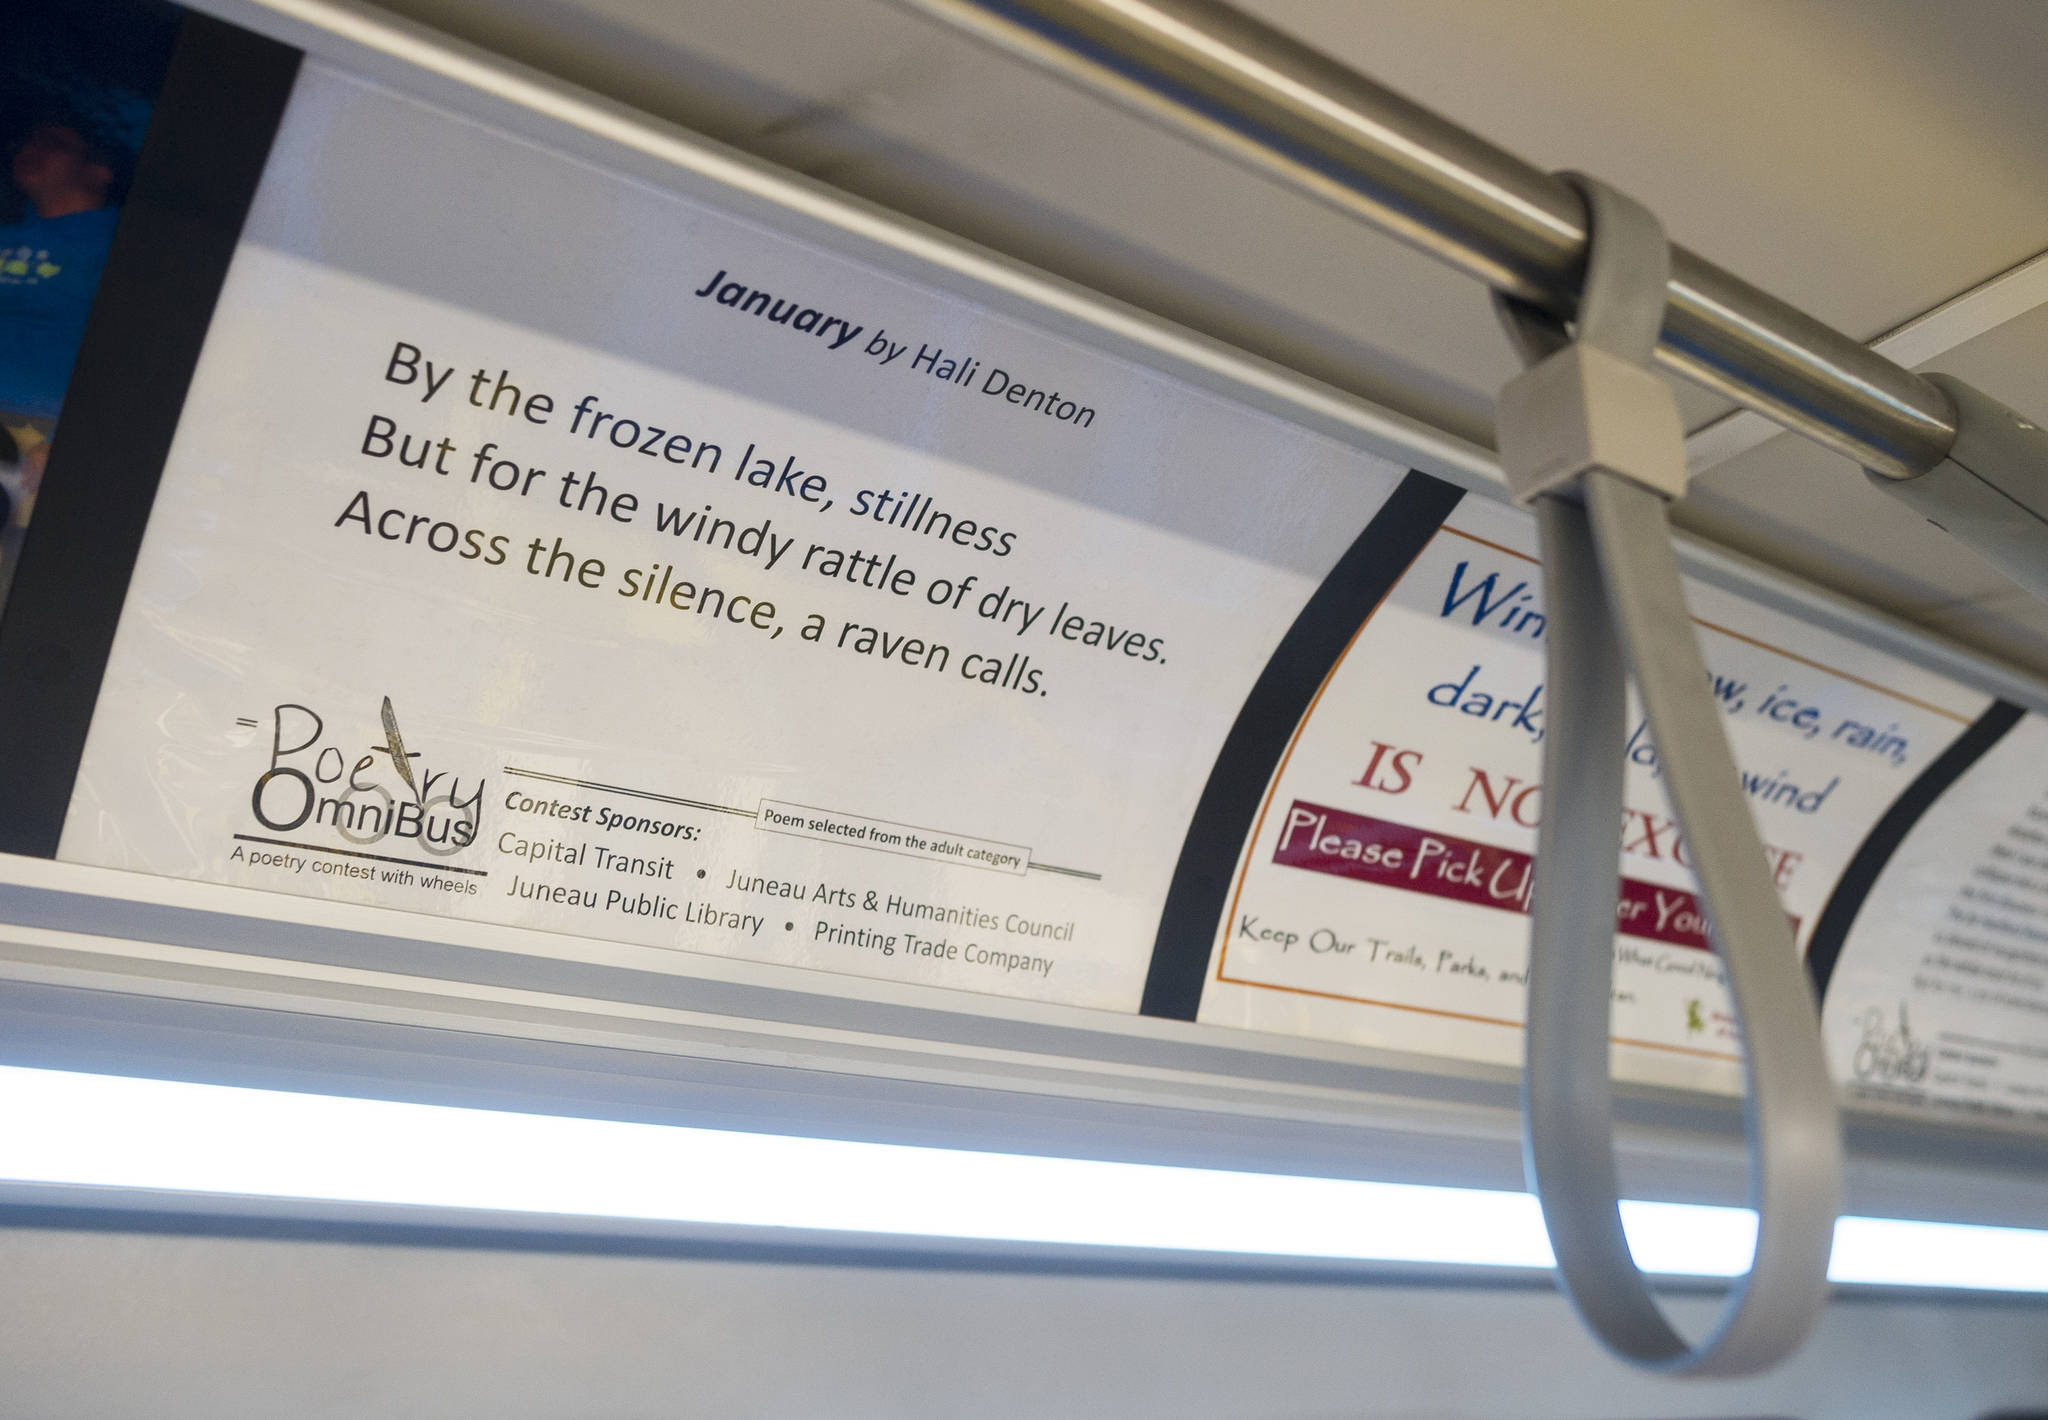 A poem by Hali Denton is displayed on a Capital Transit bus as part of the Poetry Omnibus contest in January 2018. The contest is now accepting submissions. (Michael Penn | Juneau Empire File)